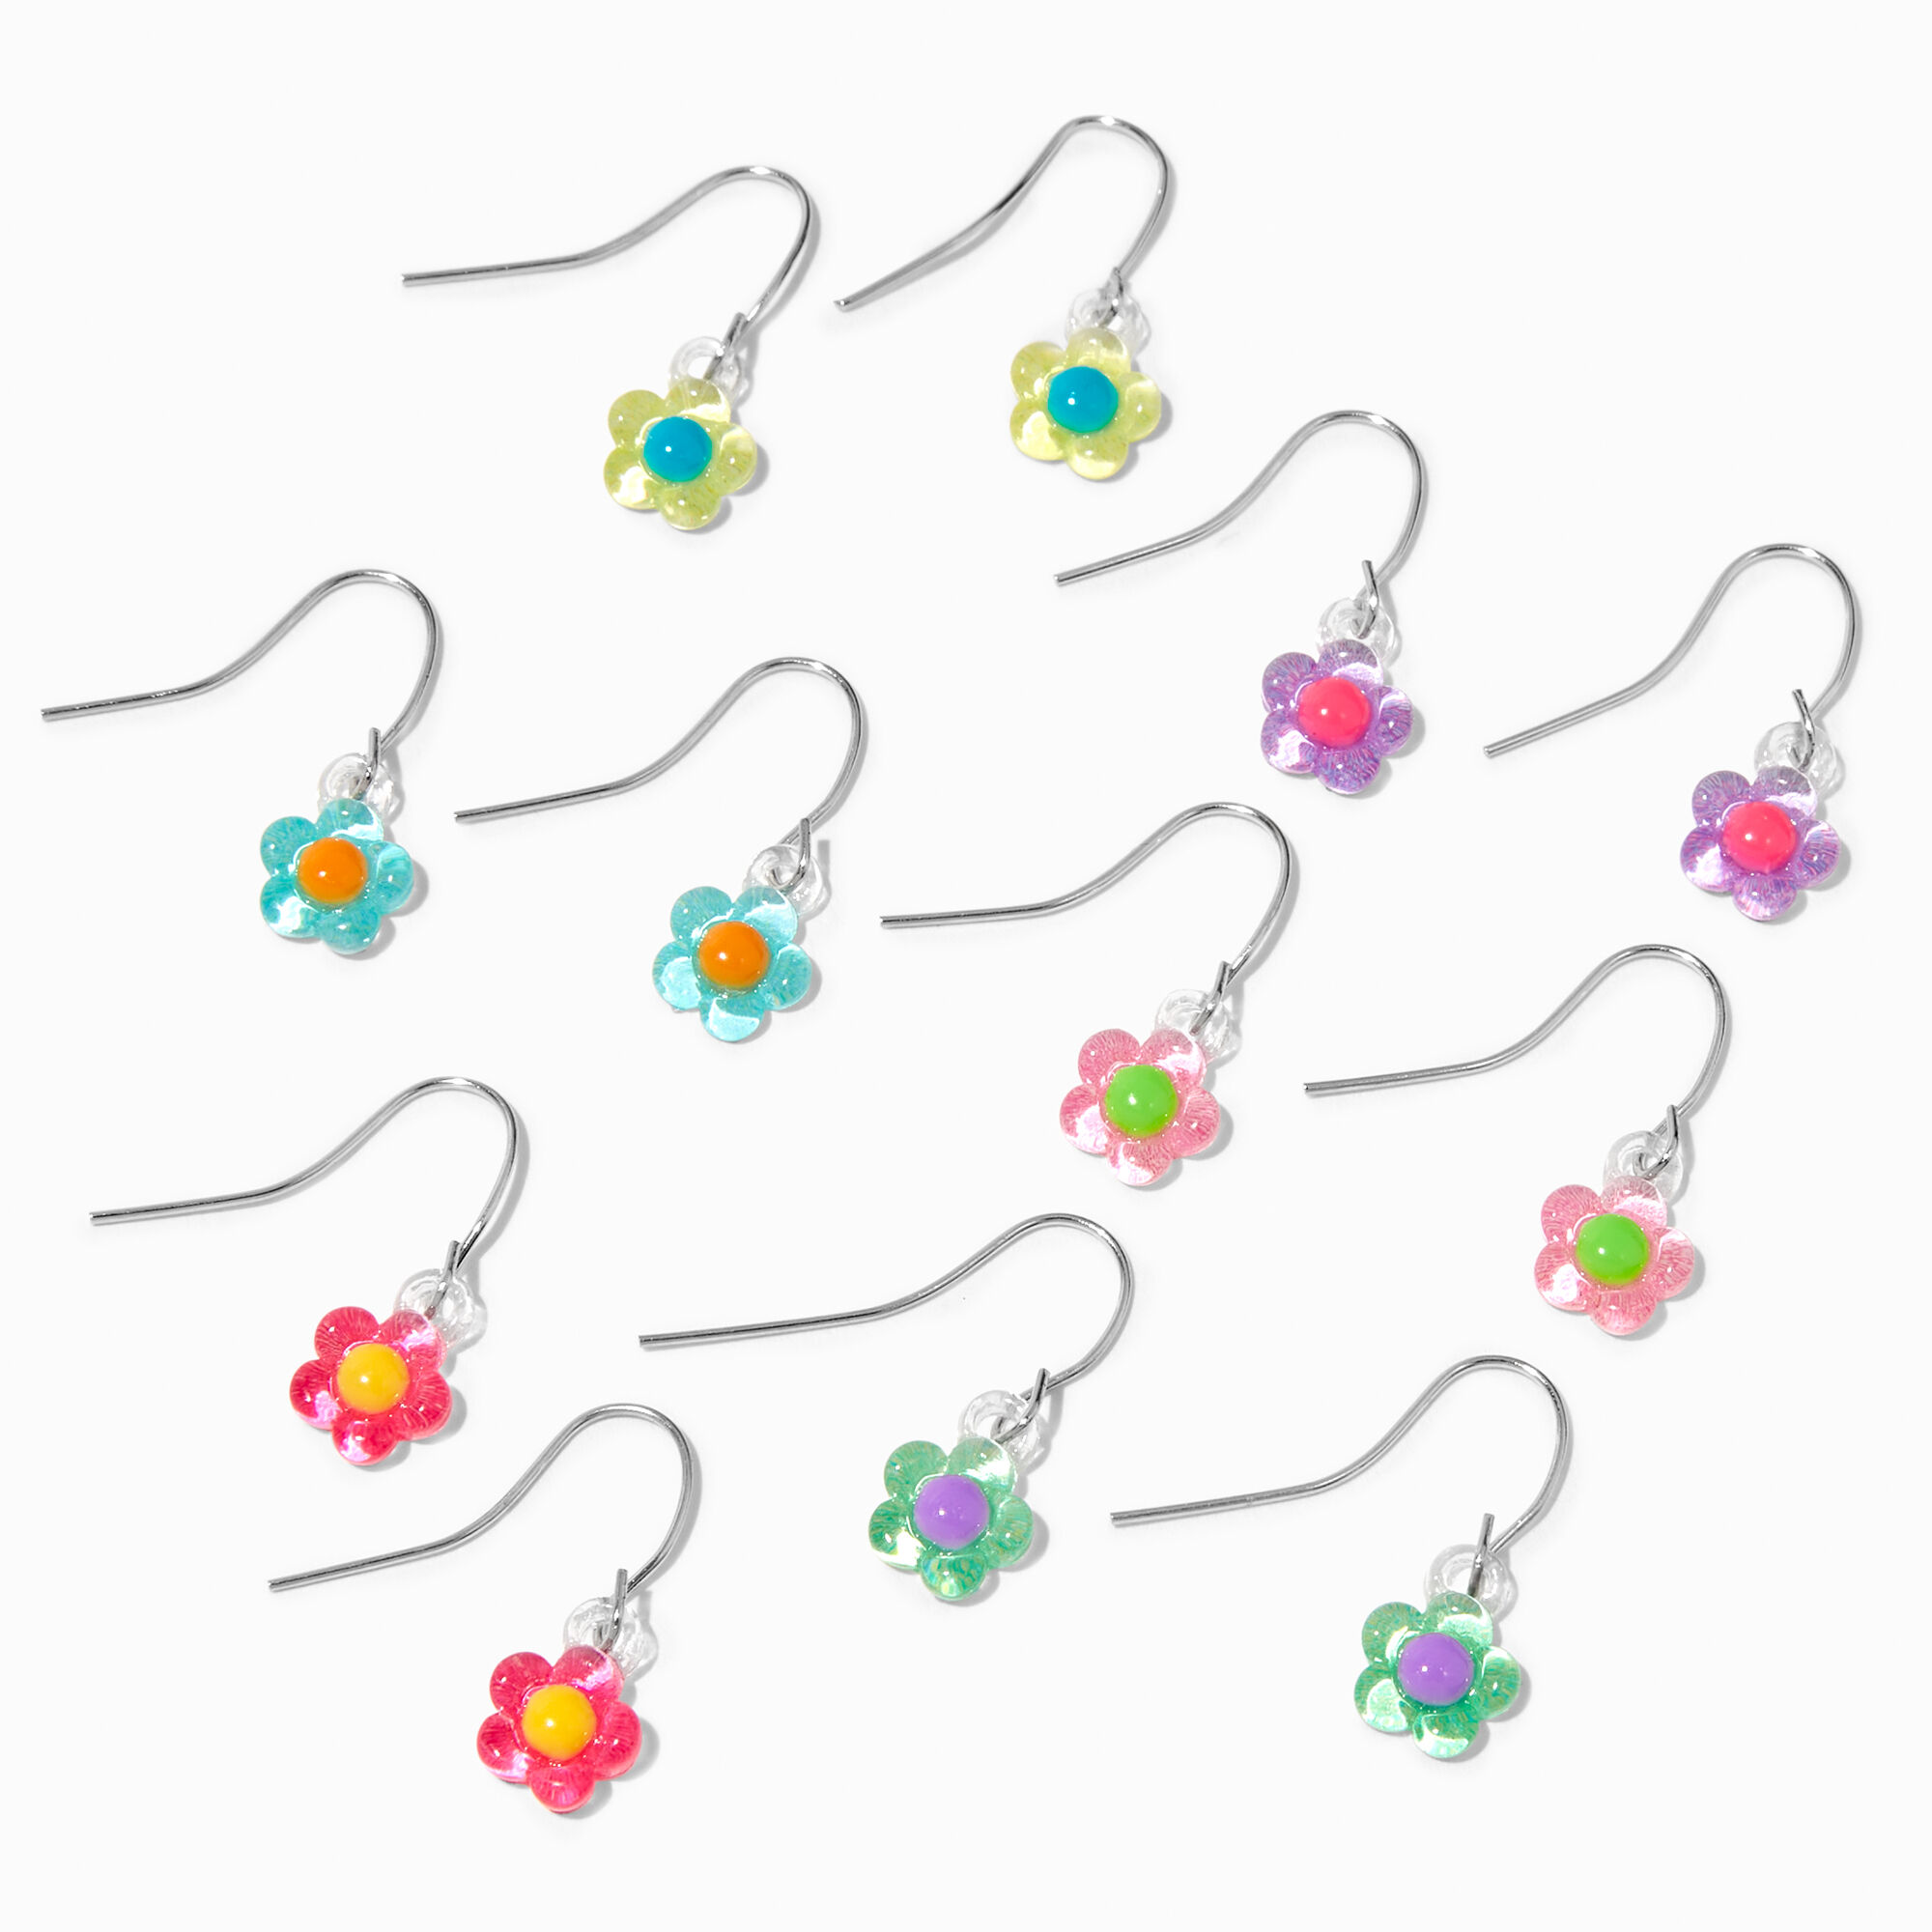 View Claires Tone 1 Acrylic Daisy Flower Drop Earrings 6 Pack Silver information